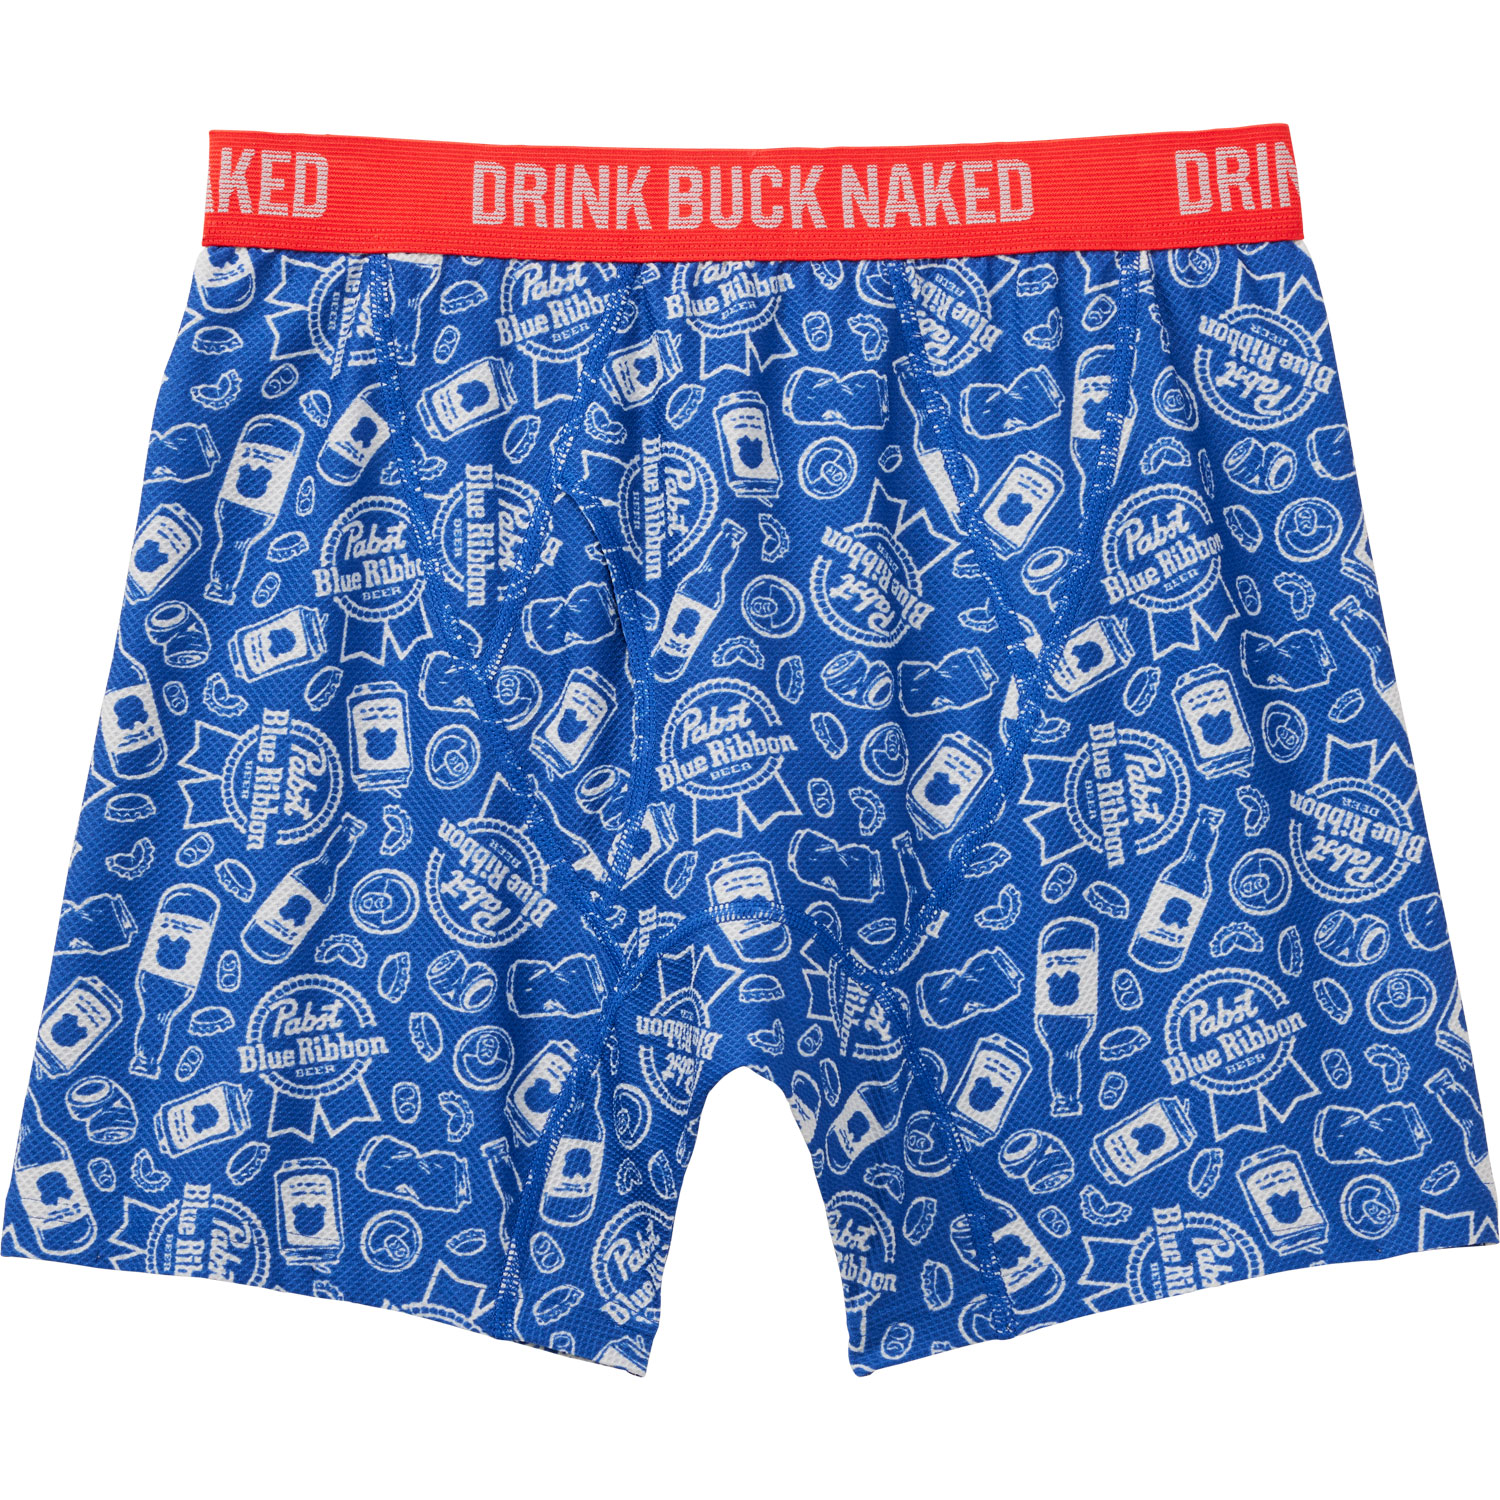 1 Pair Duluth Trading Buck Naked Boxer Brief in St Knickers 76715 